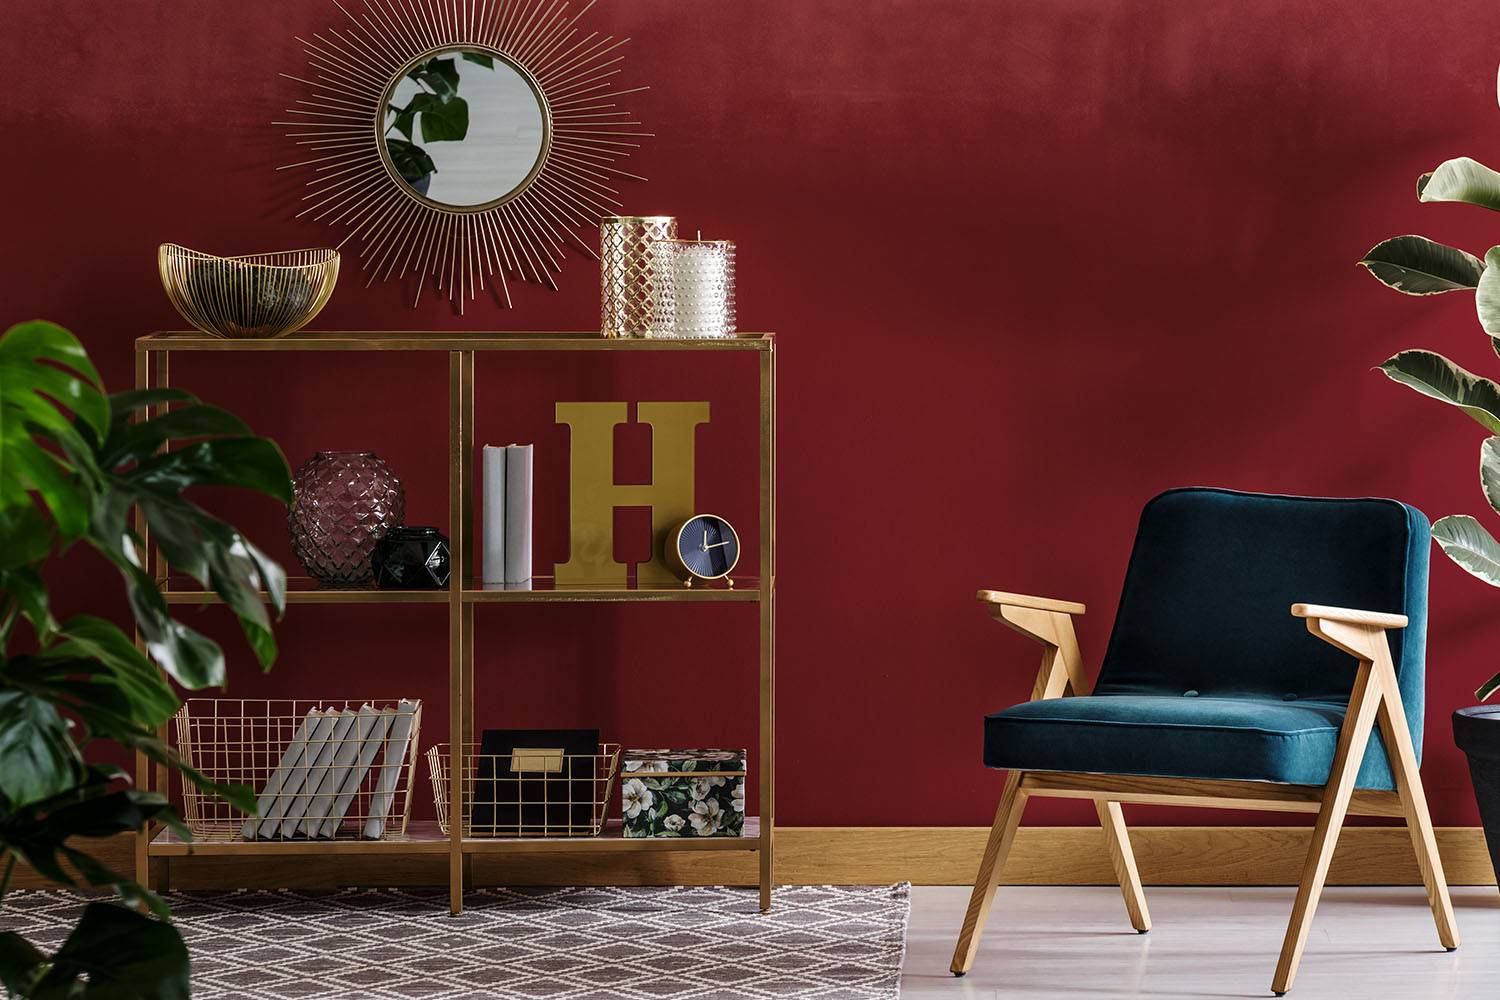 midcentury modern styled navy blue chair and shelf with gold accents and burgundy wall